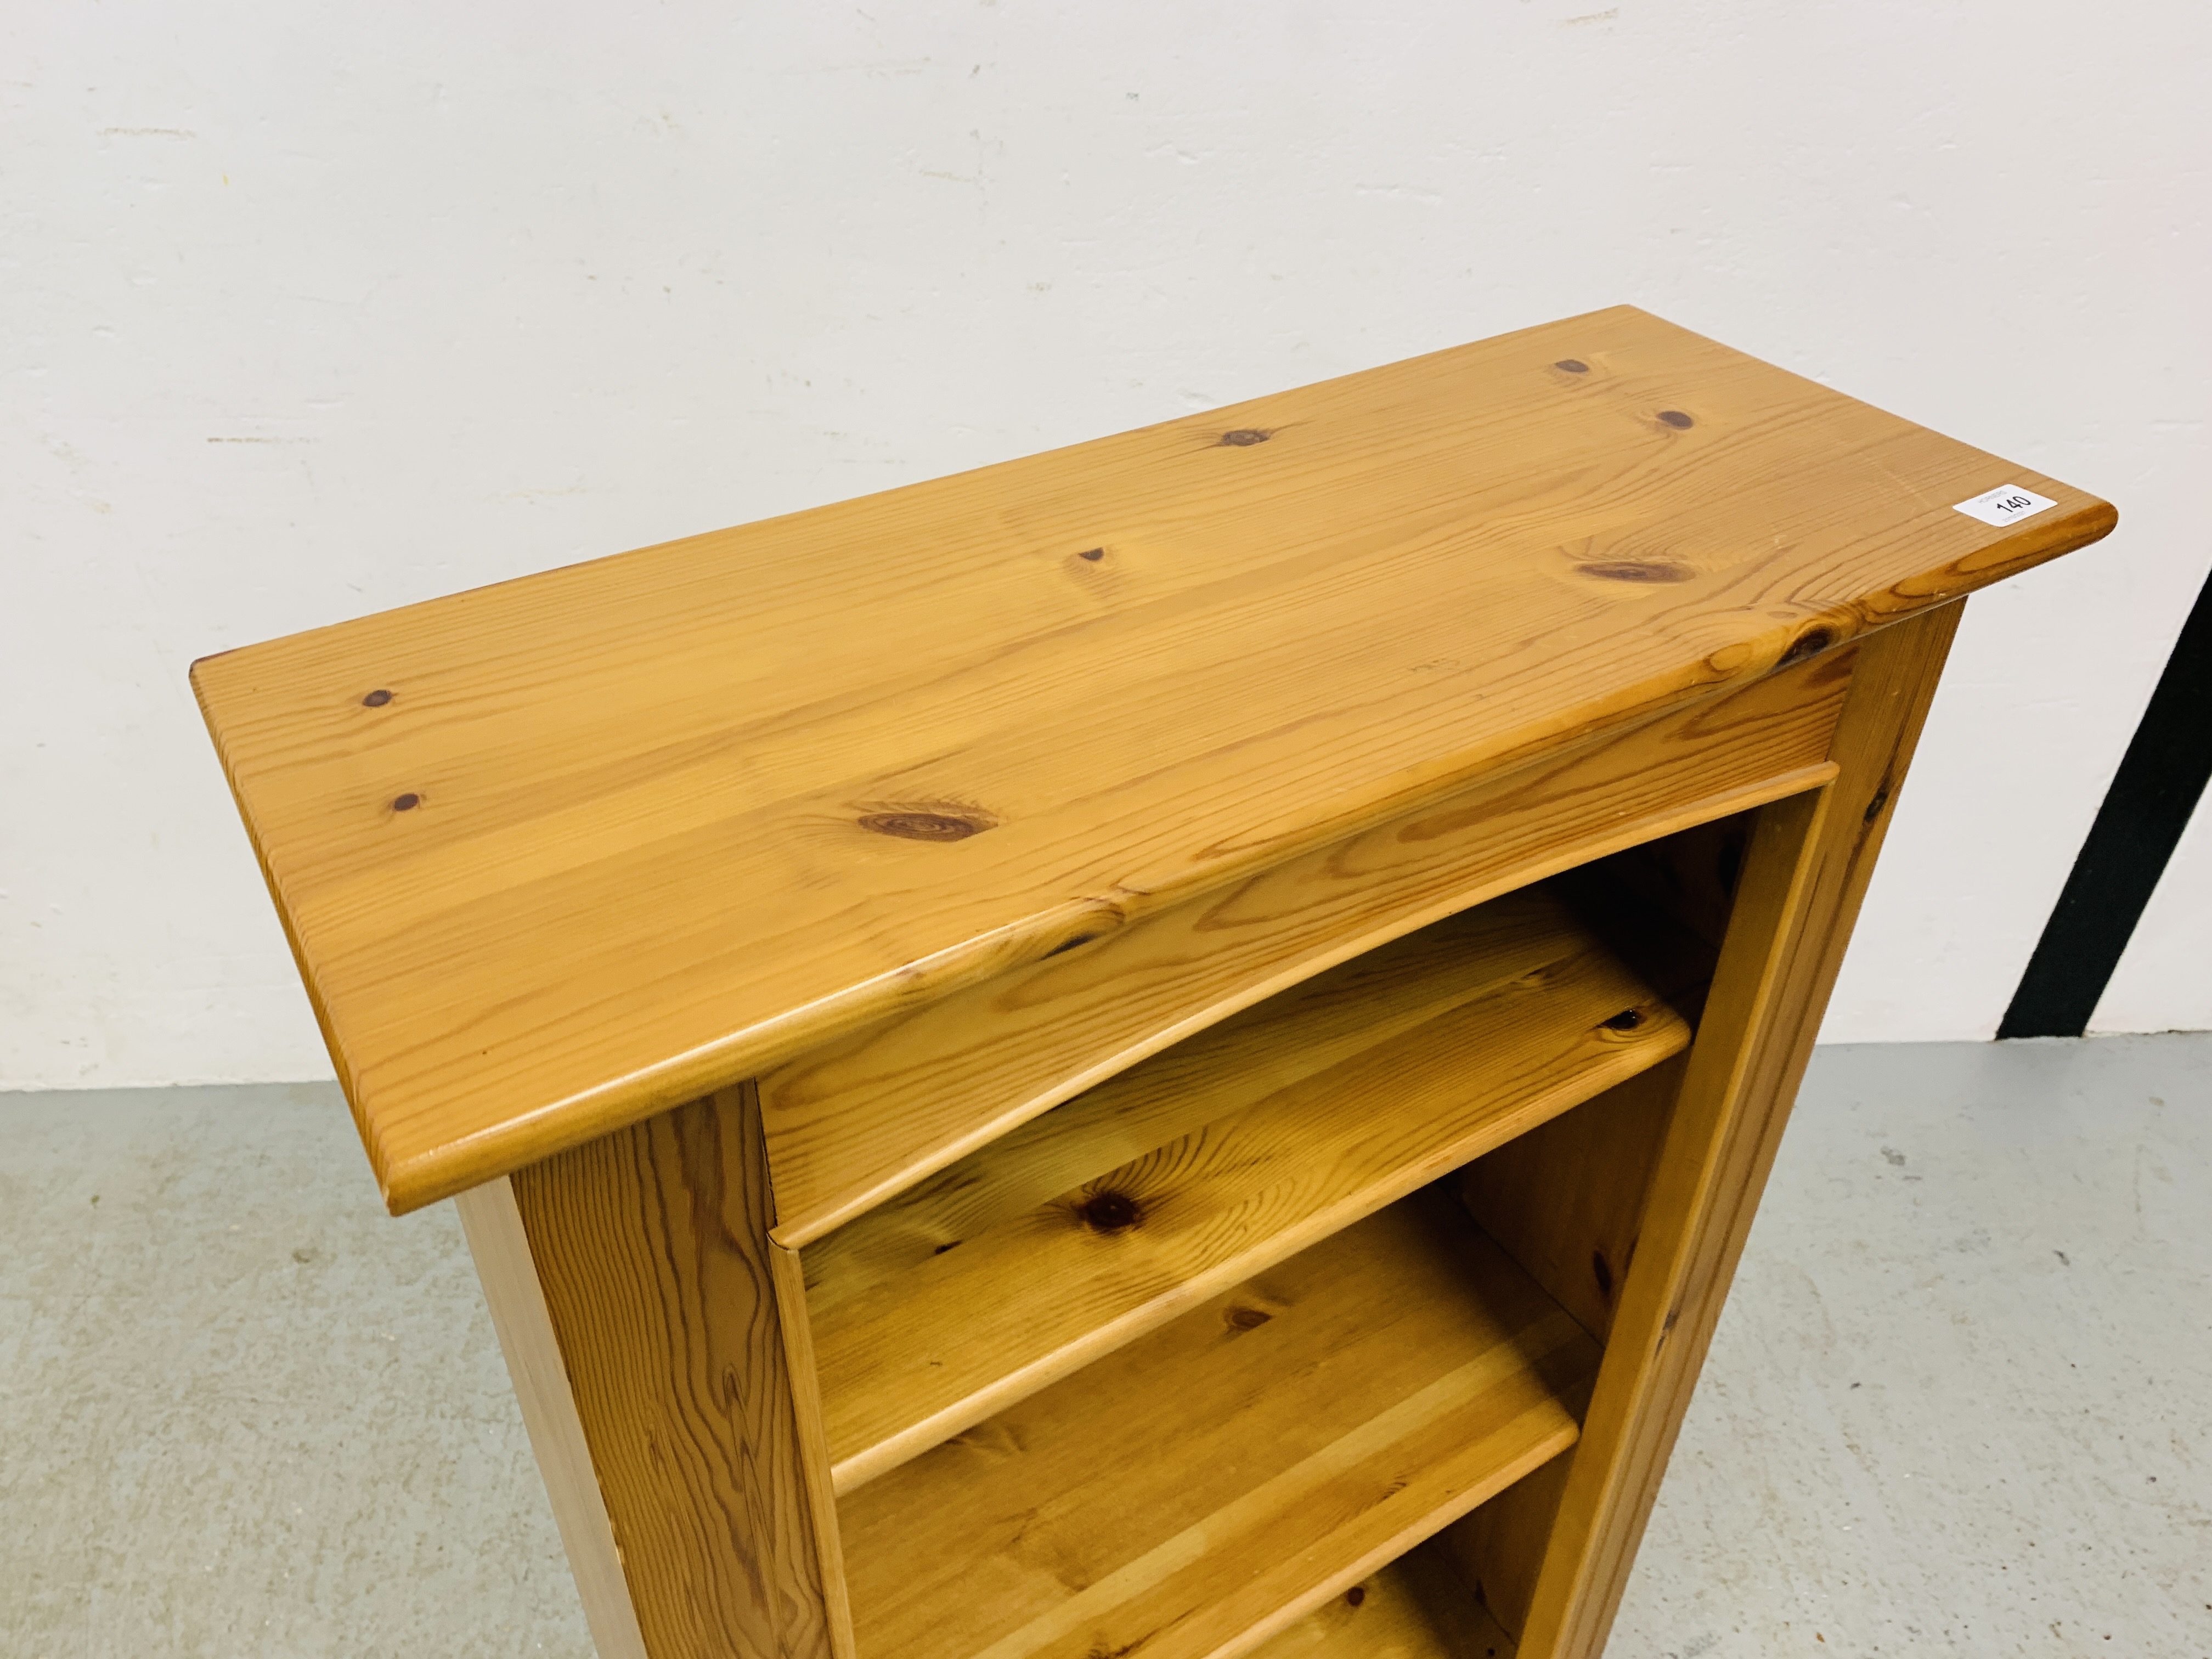 A SOLID HONEY PINE BOOKSHELF WITH TONGUE AND GROOVE BOARDED BACK - W 66CM. D 26CM. H 107CM. - Image 2 of 5